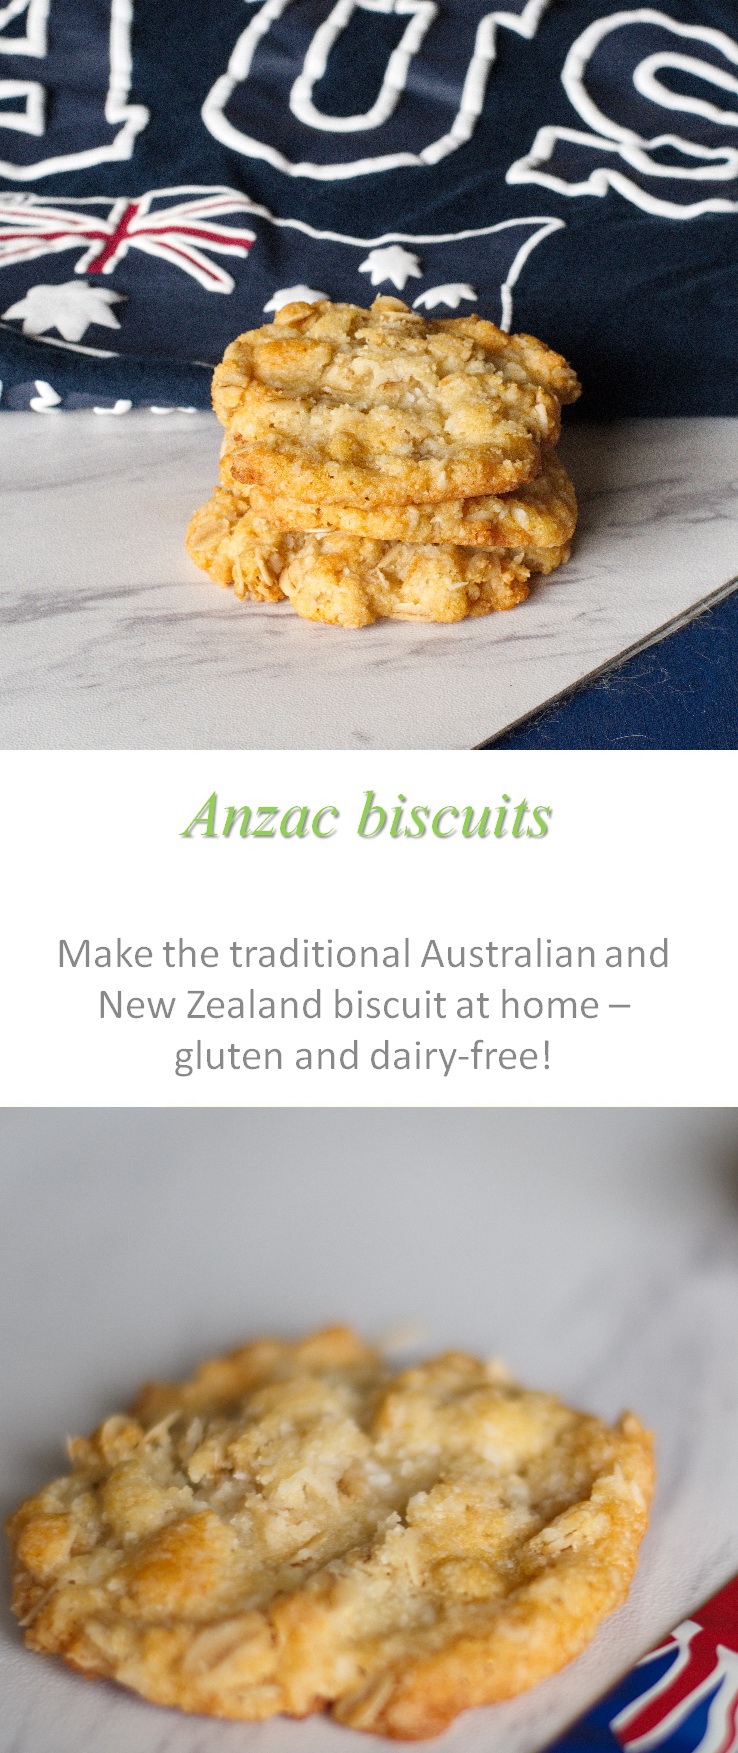 These Anzac biscuits are sweet and chewy using oats, coconut and golden syrup as the magical ingredient. #anzac #cookathome #glutenfree #dairyfree